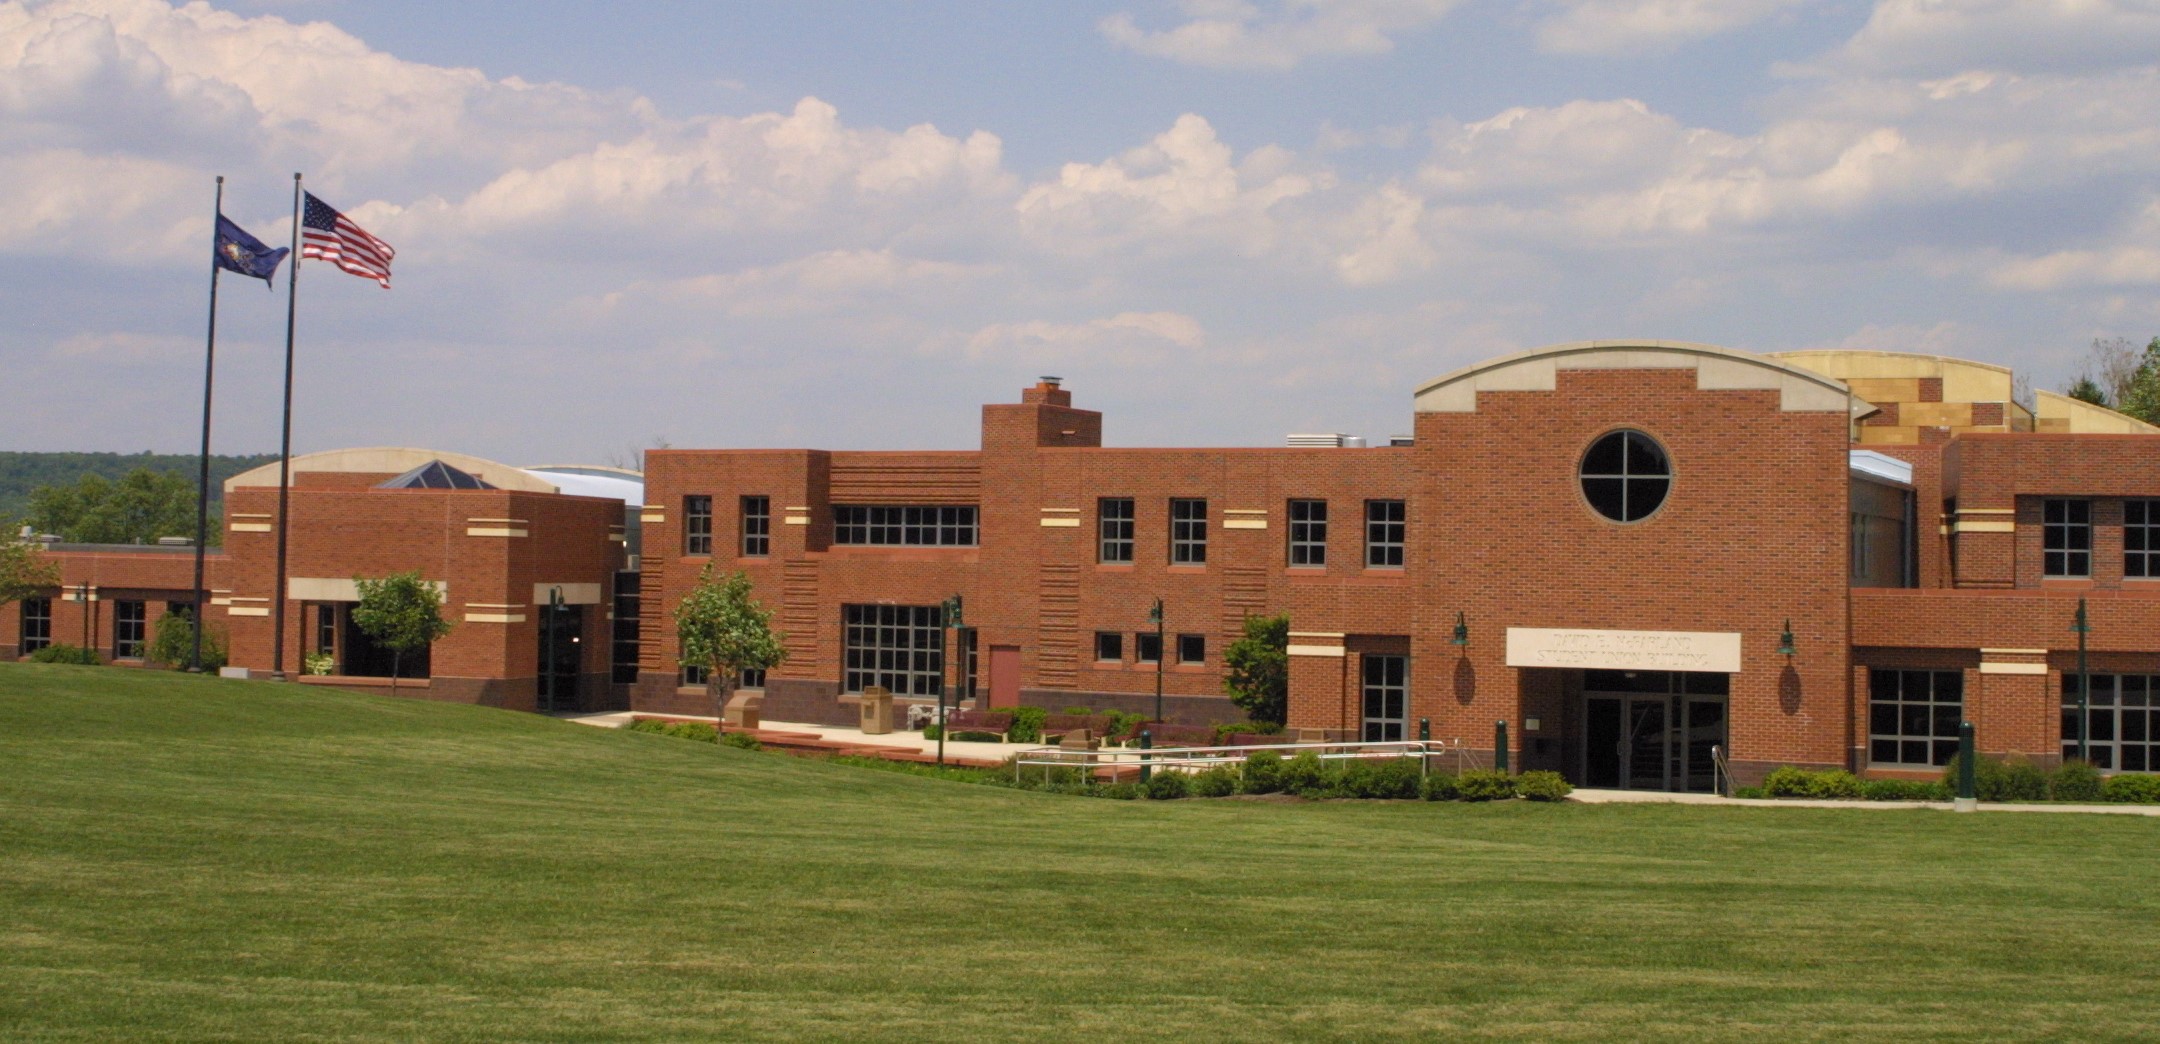 McFarland Student Union picture and the American and Pennsylvania flags are flying to the left of the building